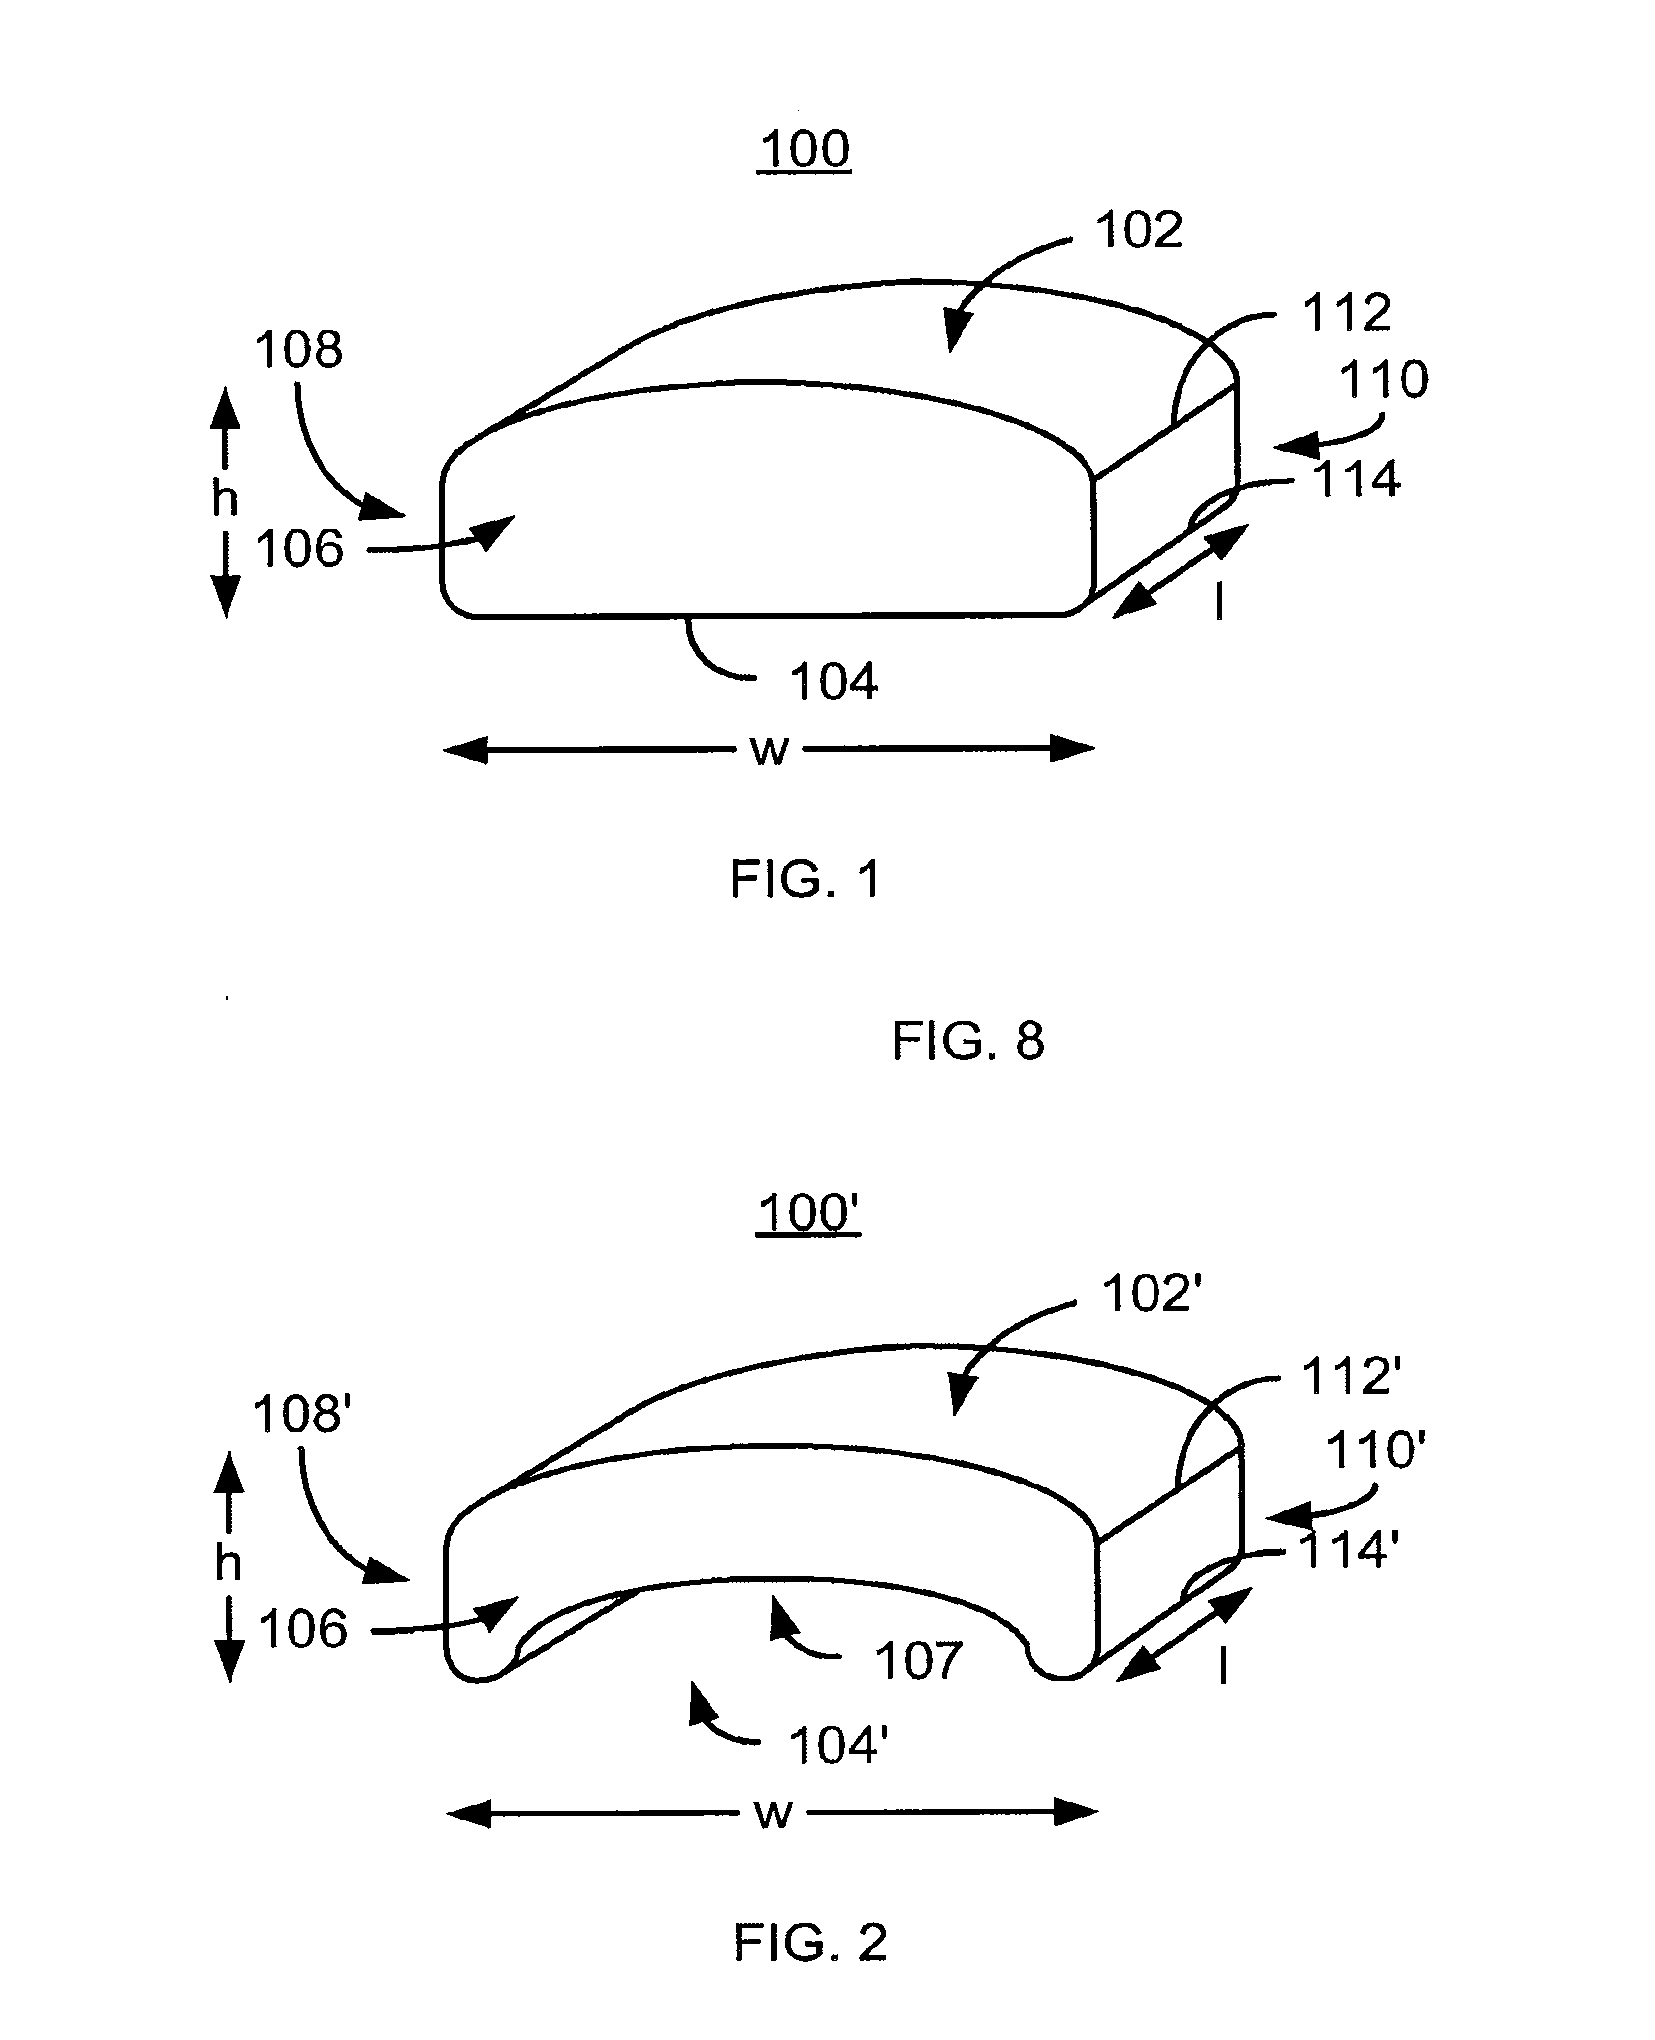 Method and System for Patella Tendon Realignment